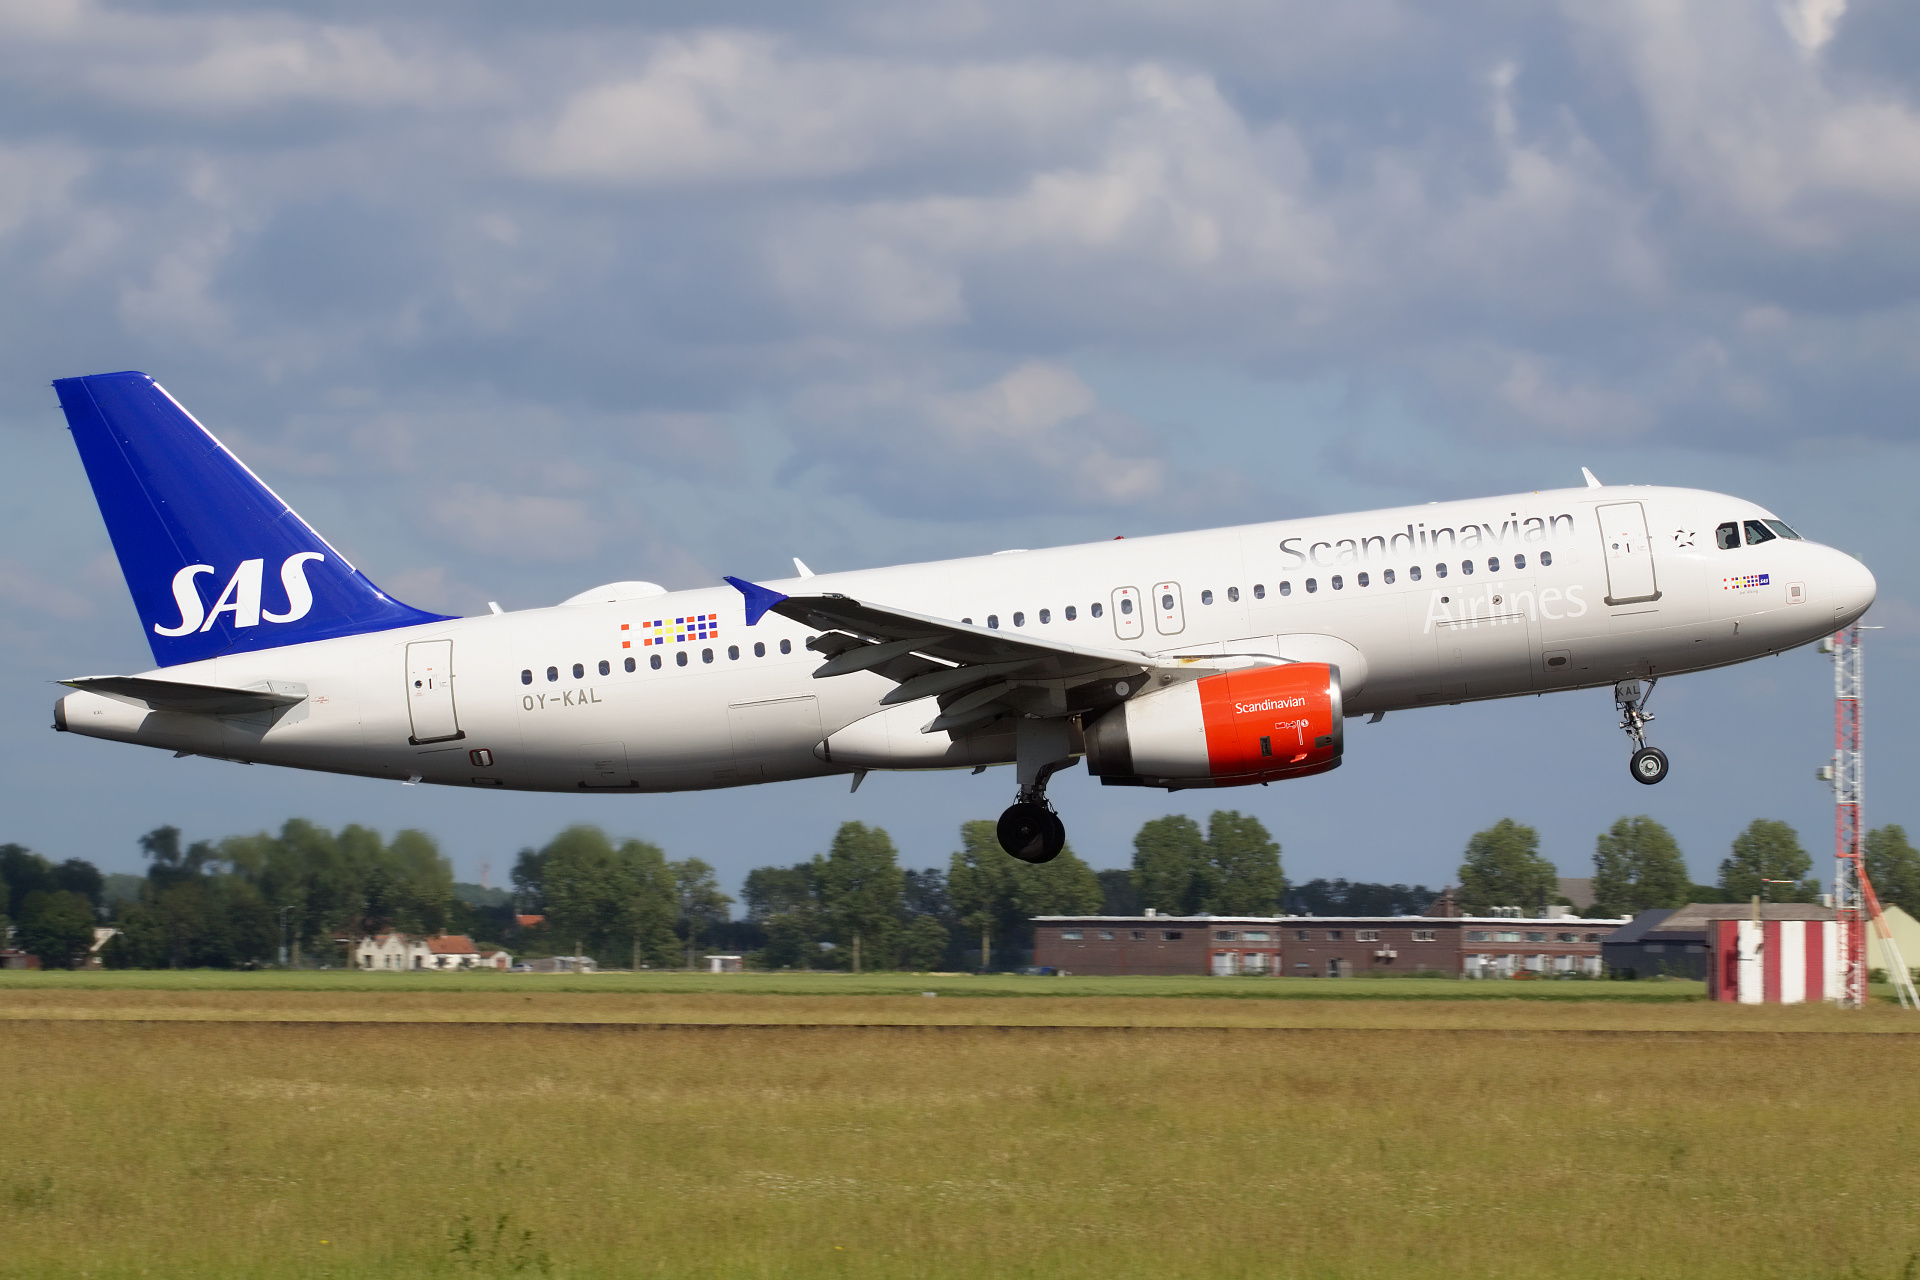 OY-KAL, SAS Scandinavian Airlines System (Aircraft » Schiphol Spotting » Airbus A320-200)